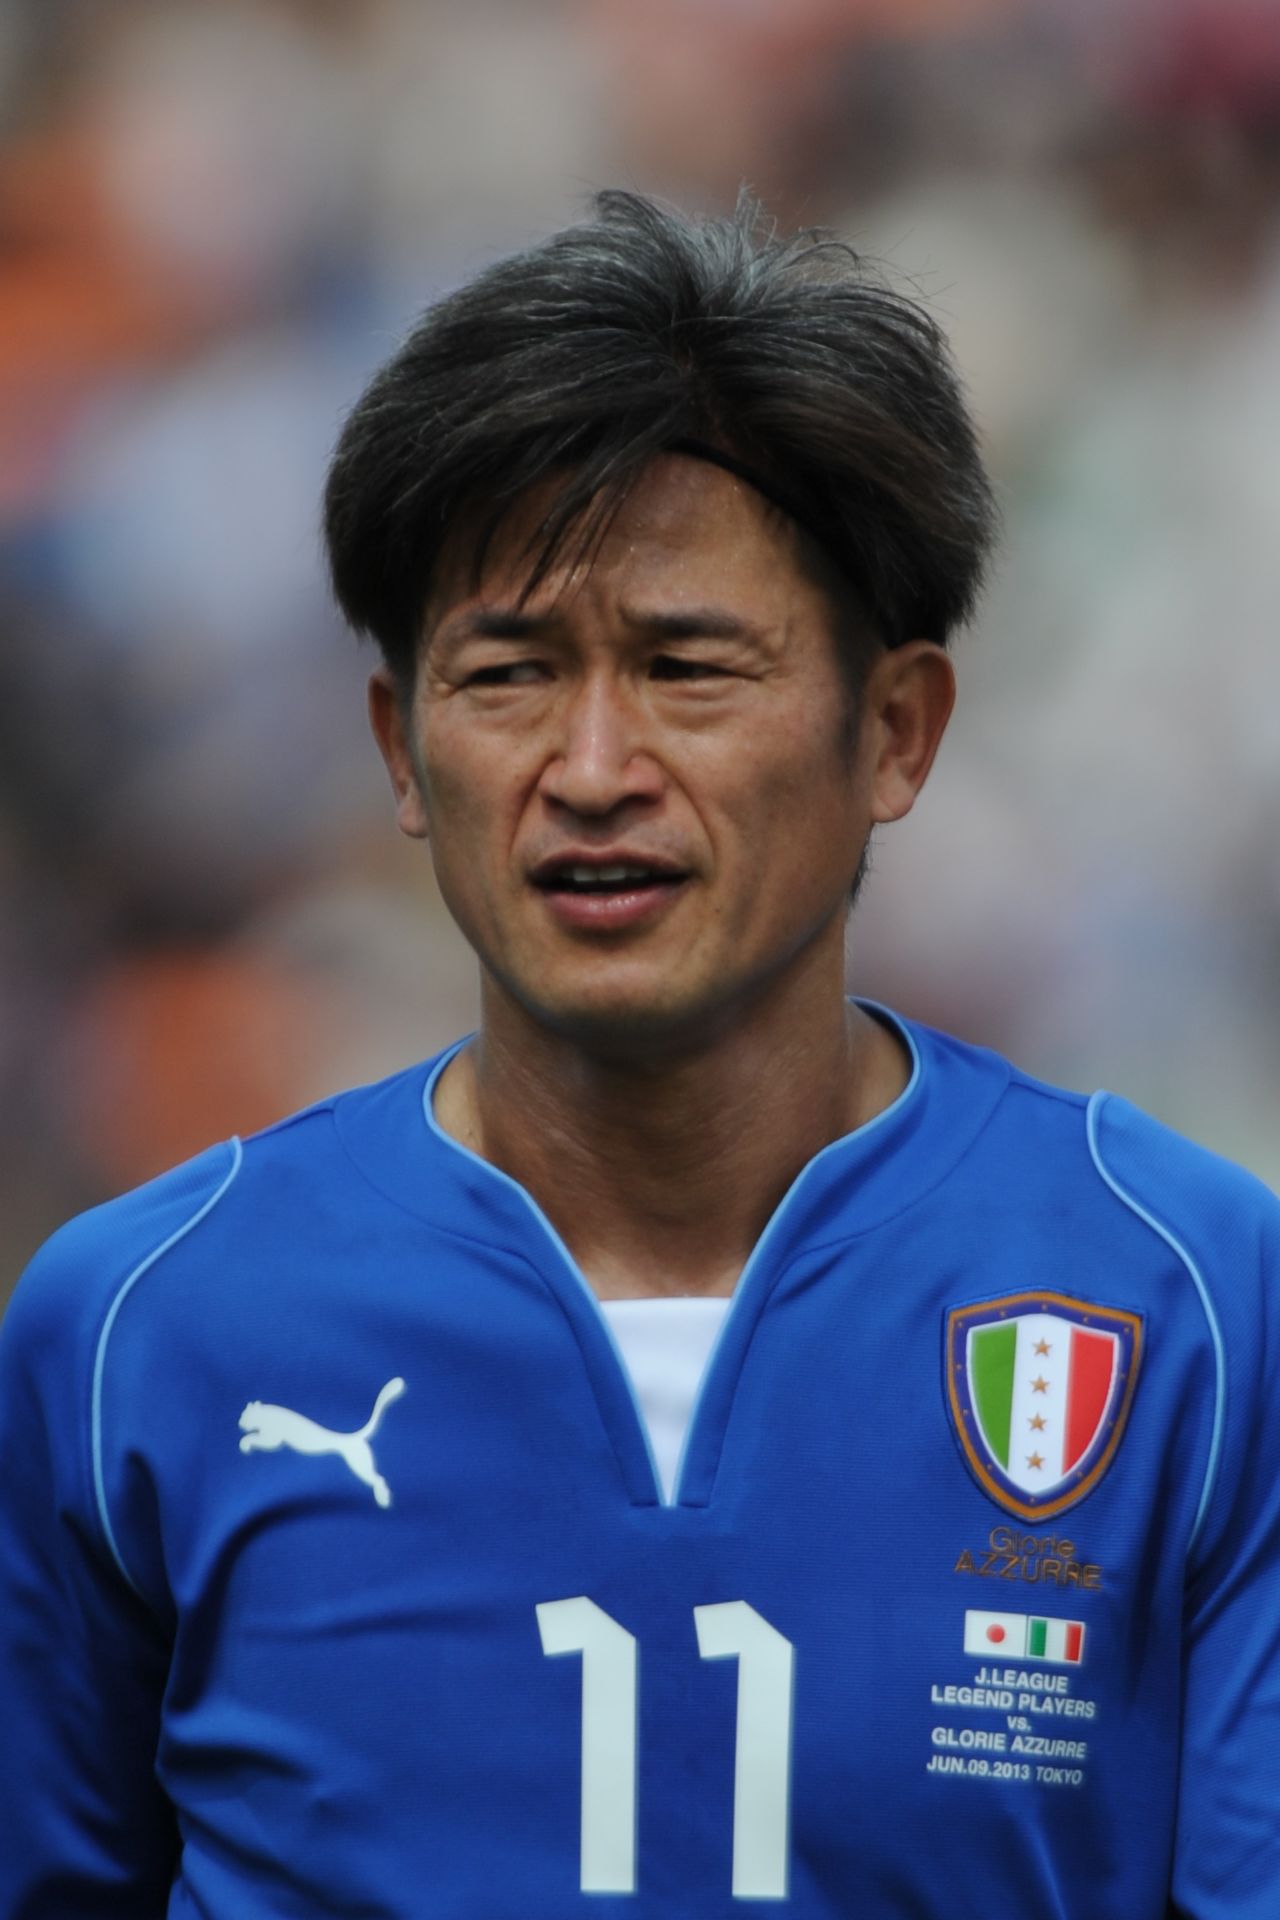 The 48-year-old has three goals in 16 appearances for the second division Japanese side this season, however he is currently sidelined with a thigh injury.